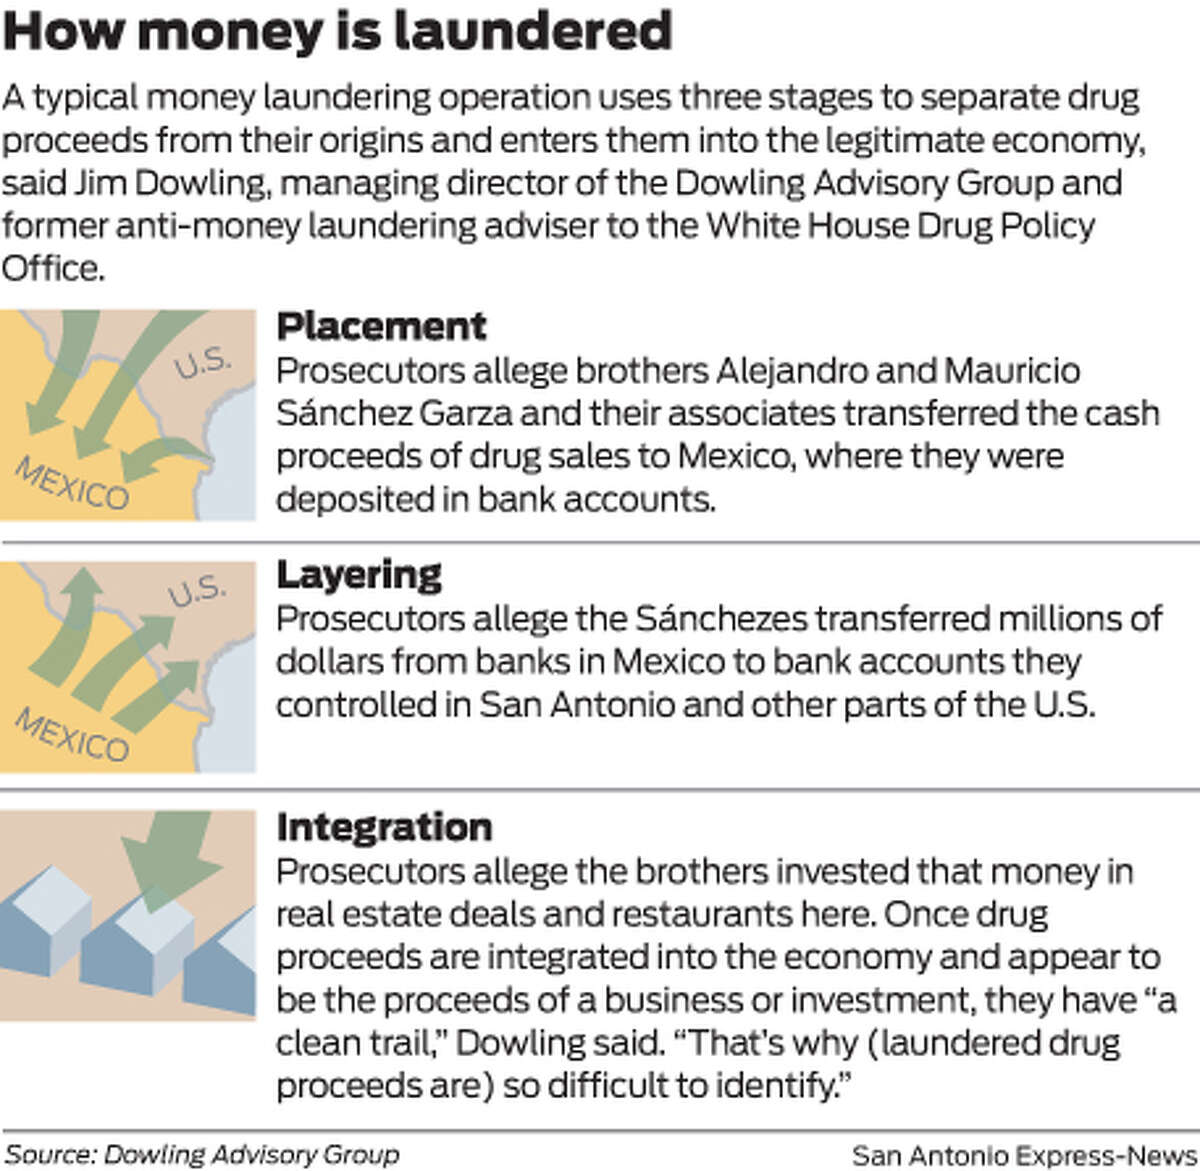 A typical money laundering operation uses three stages to separate drug proceeds from their origins and enters them into the legitimate economy, said Jim Dowling, managing director of the Dowling Advisory Group and former anti-money laundering adviser to the White House Drug Policy Office.